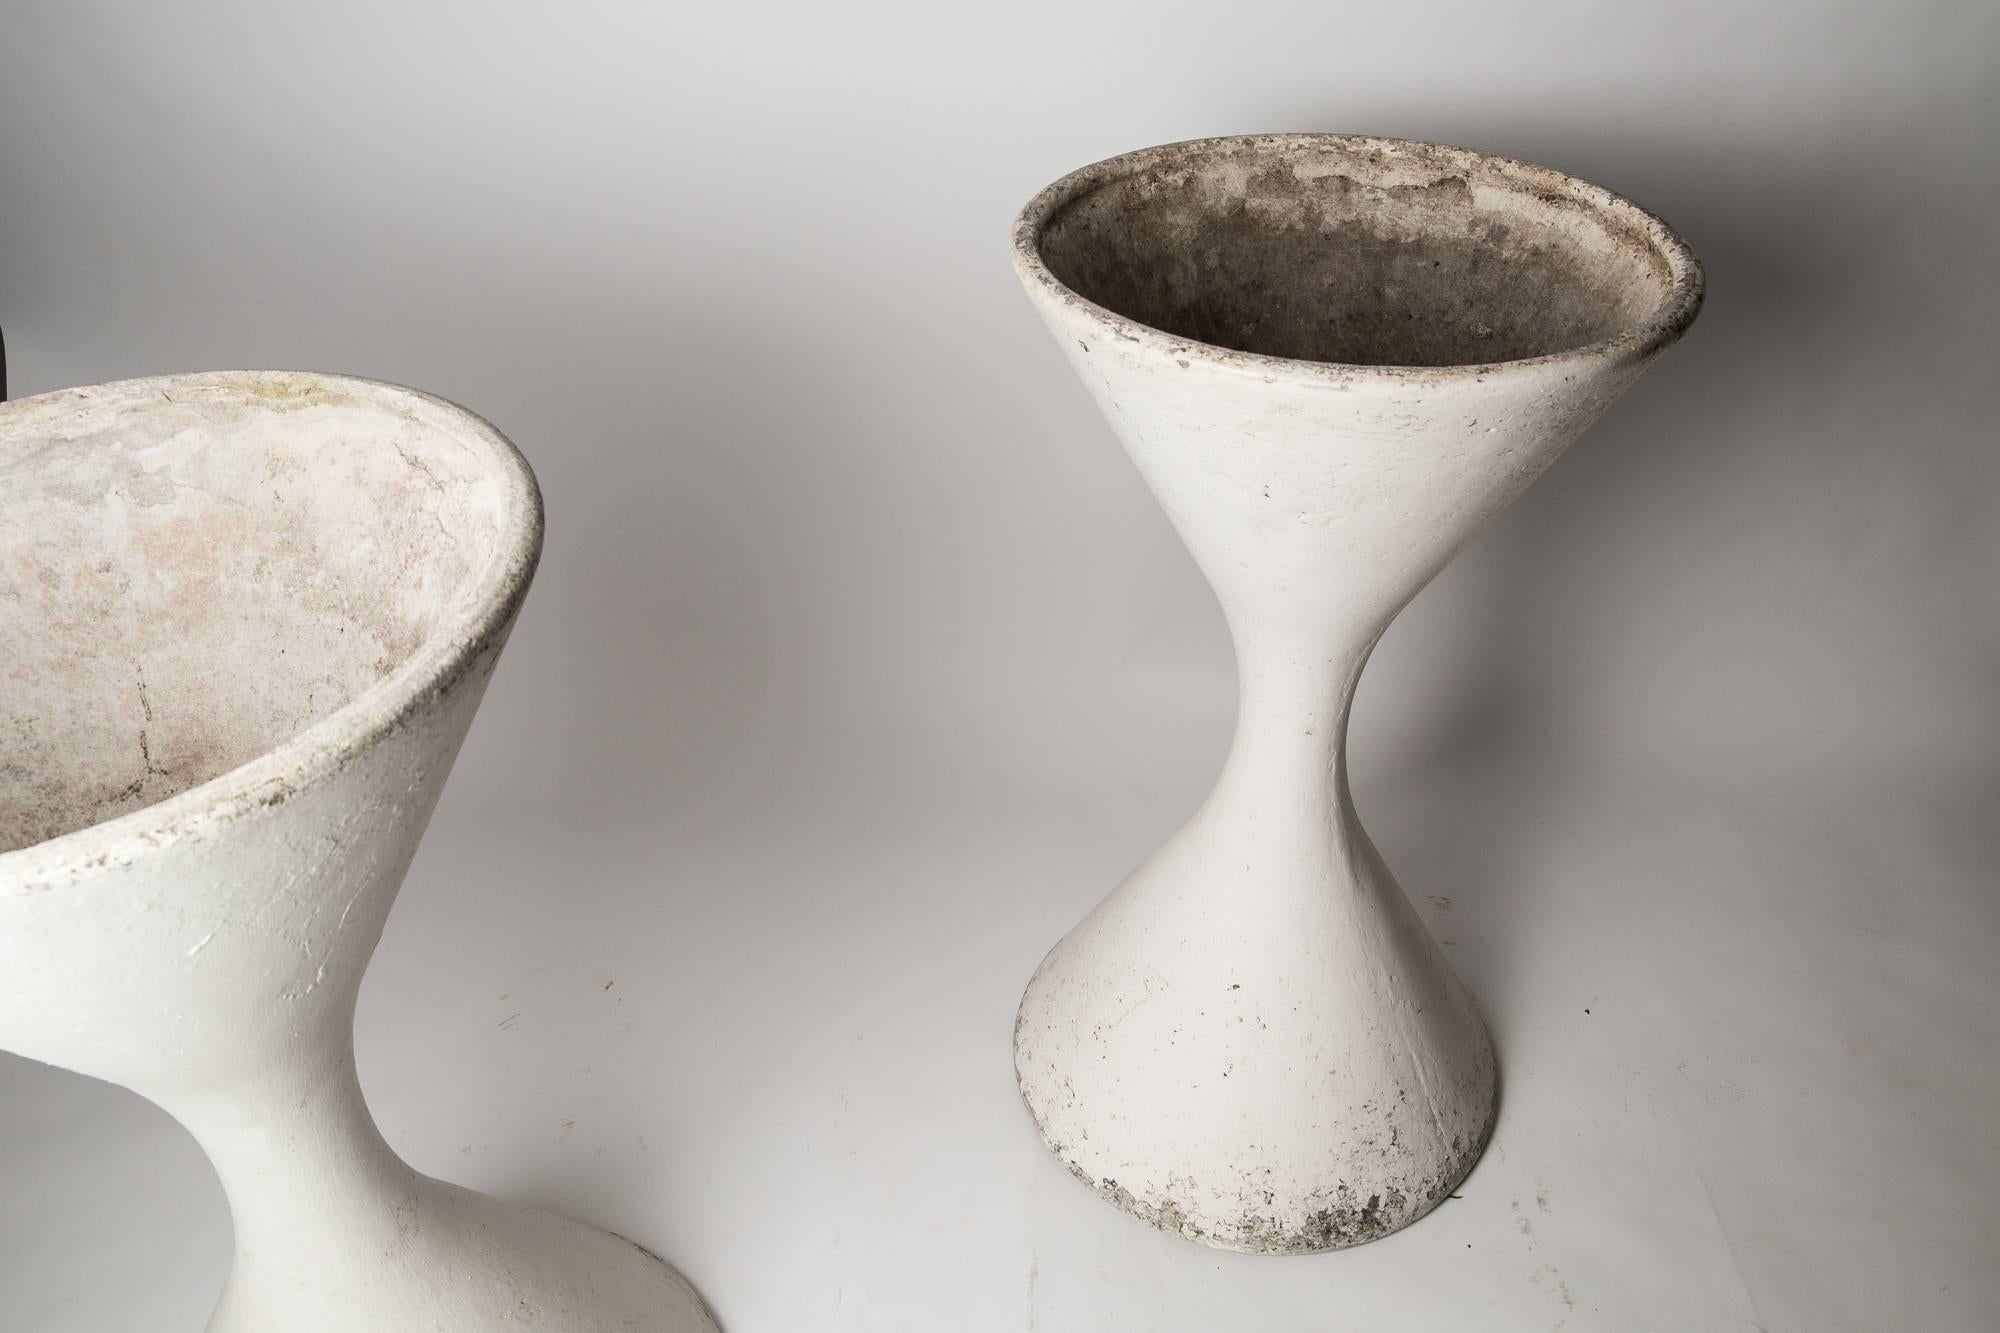 Concrete Pair of Oversized Brutalist Diabolo Planters, Willy Guhl for Eternit circa 1950s